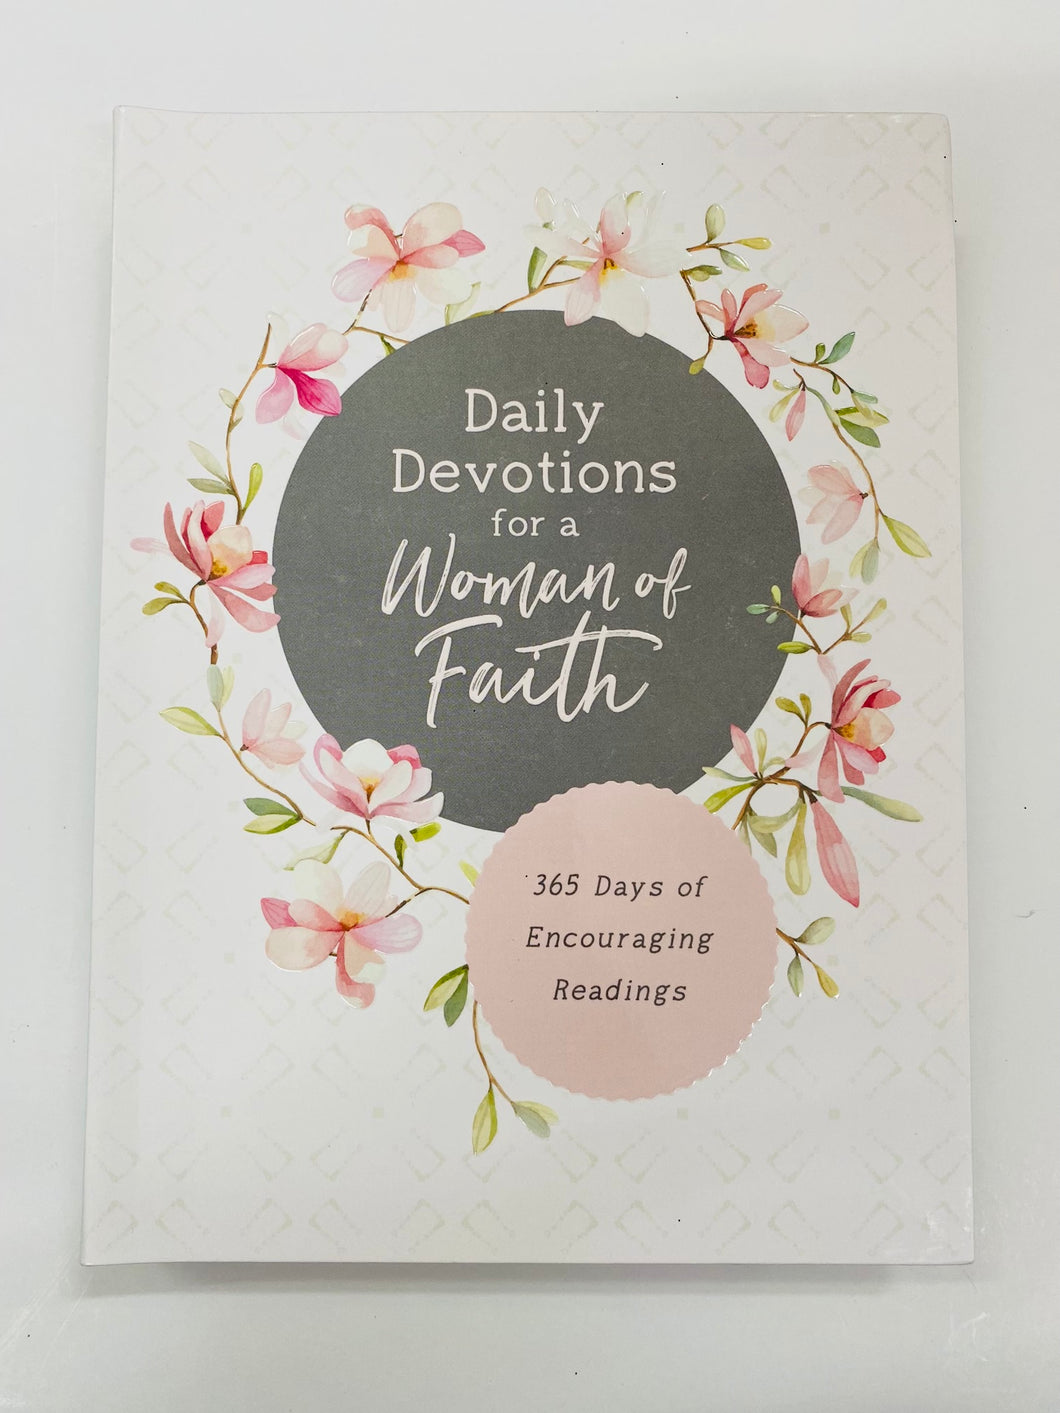 Daily Devotions for a Woman of Faith